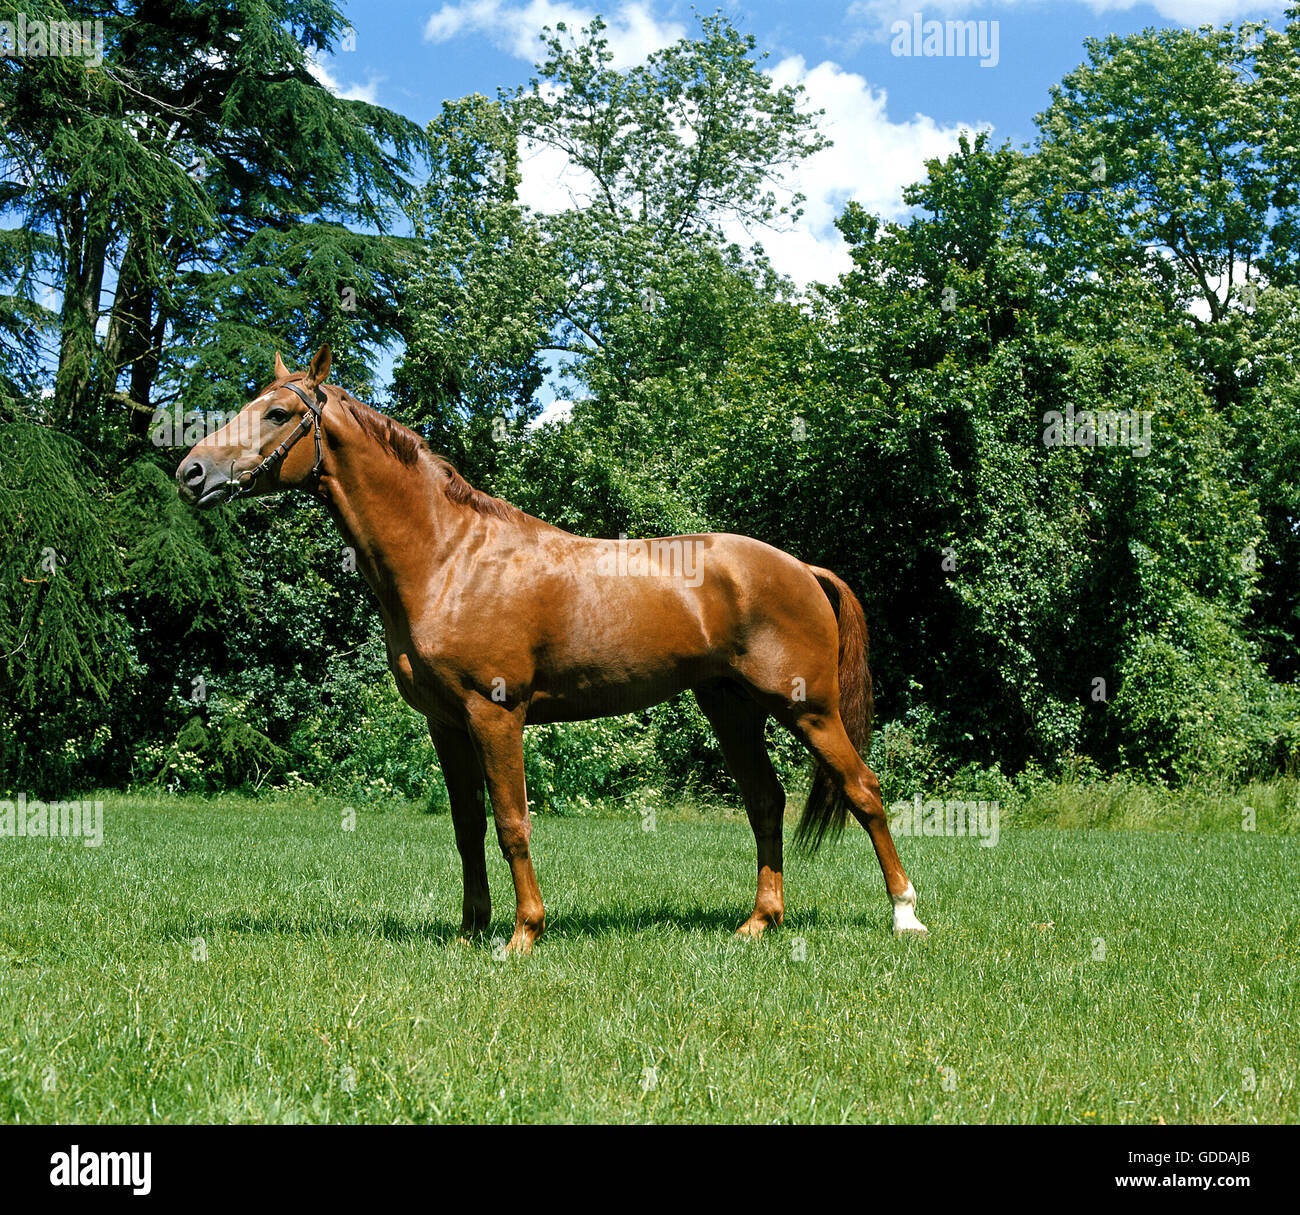 English Thoroughbred Horse, Adult standing on Grass Stock Photo